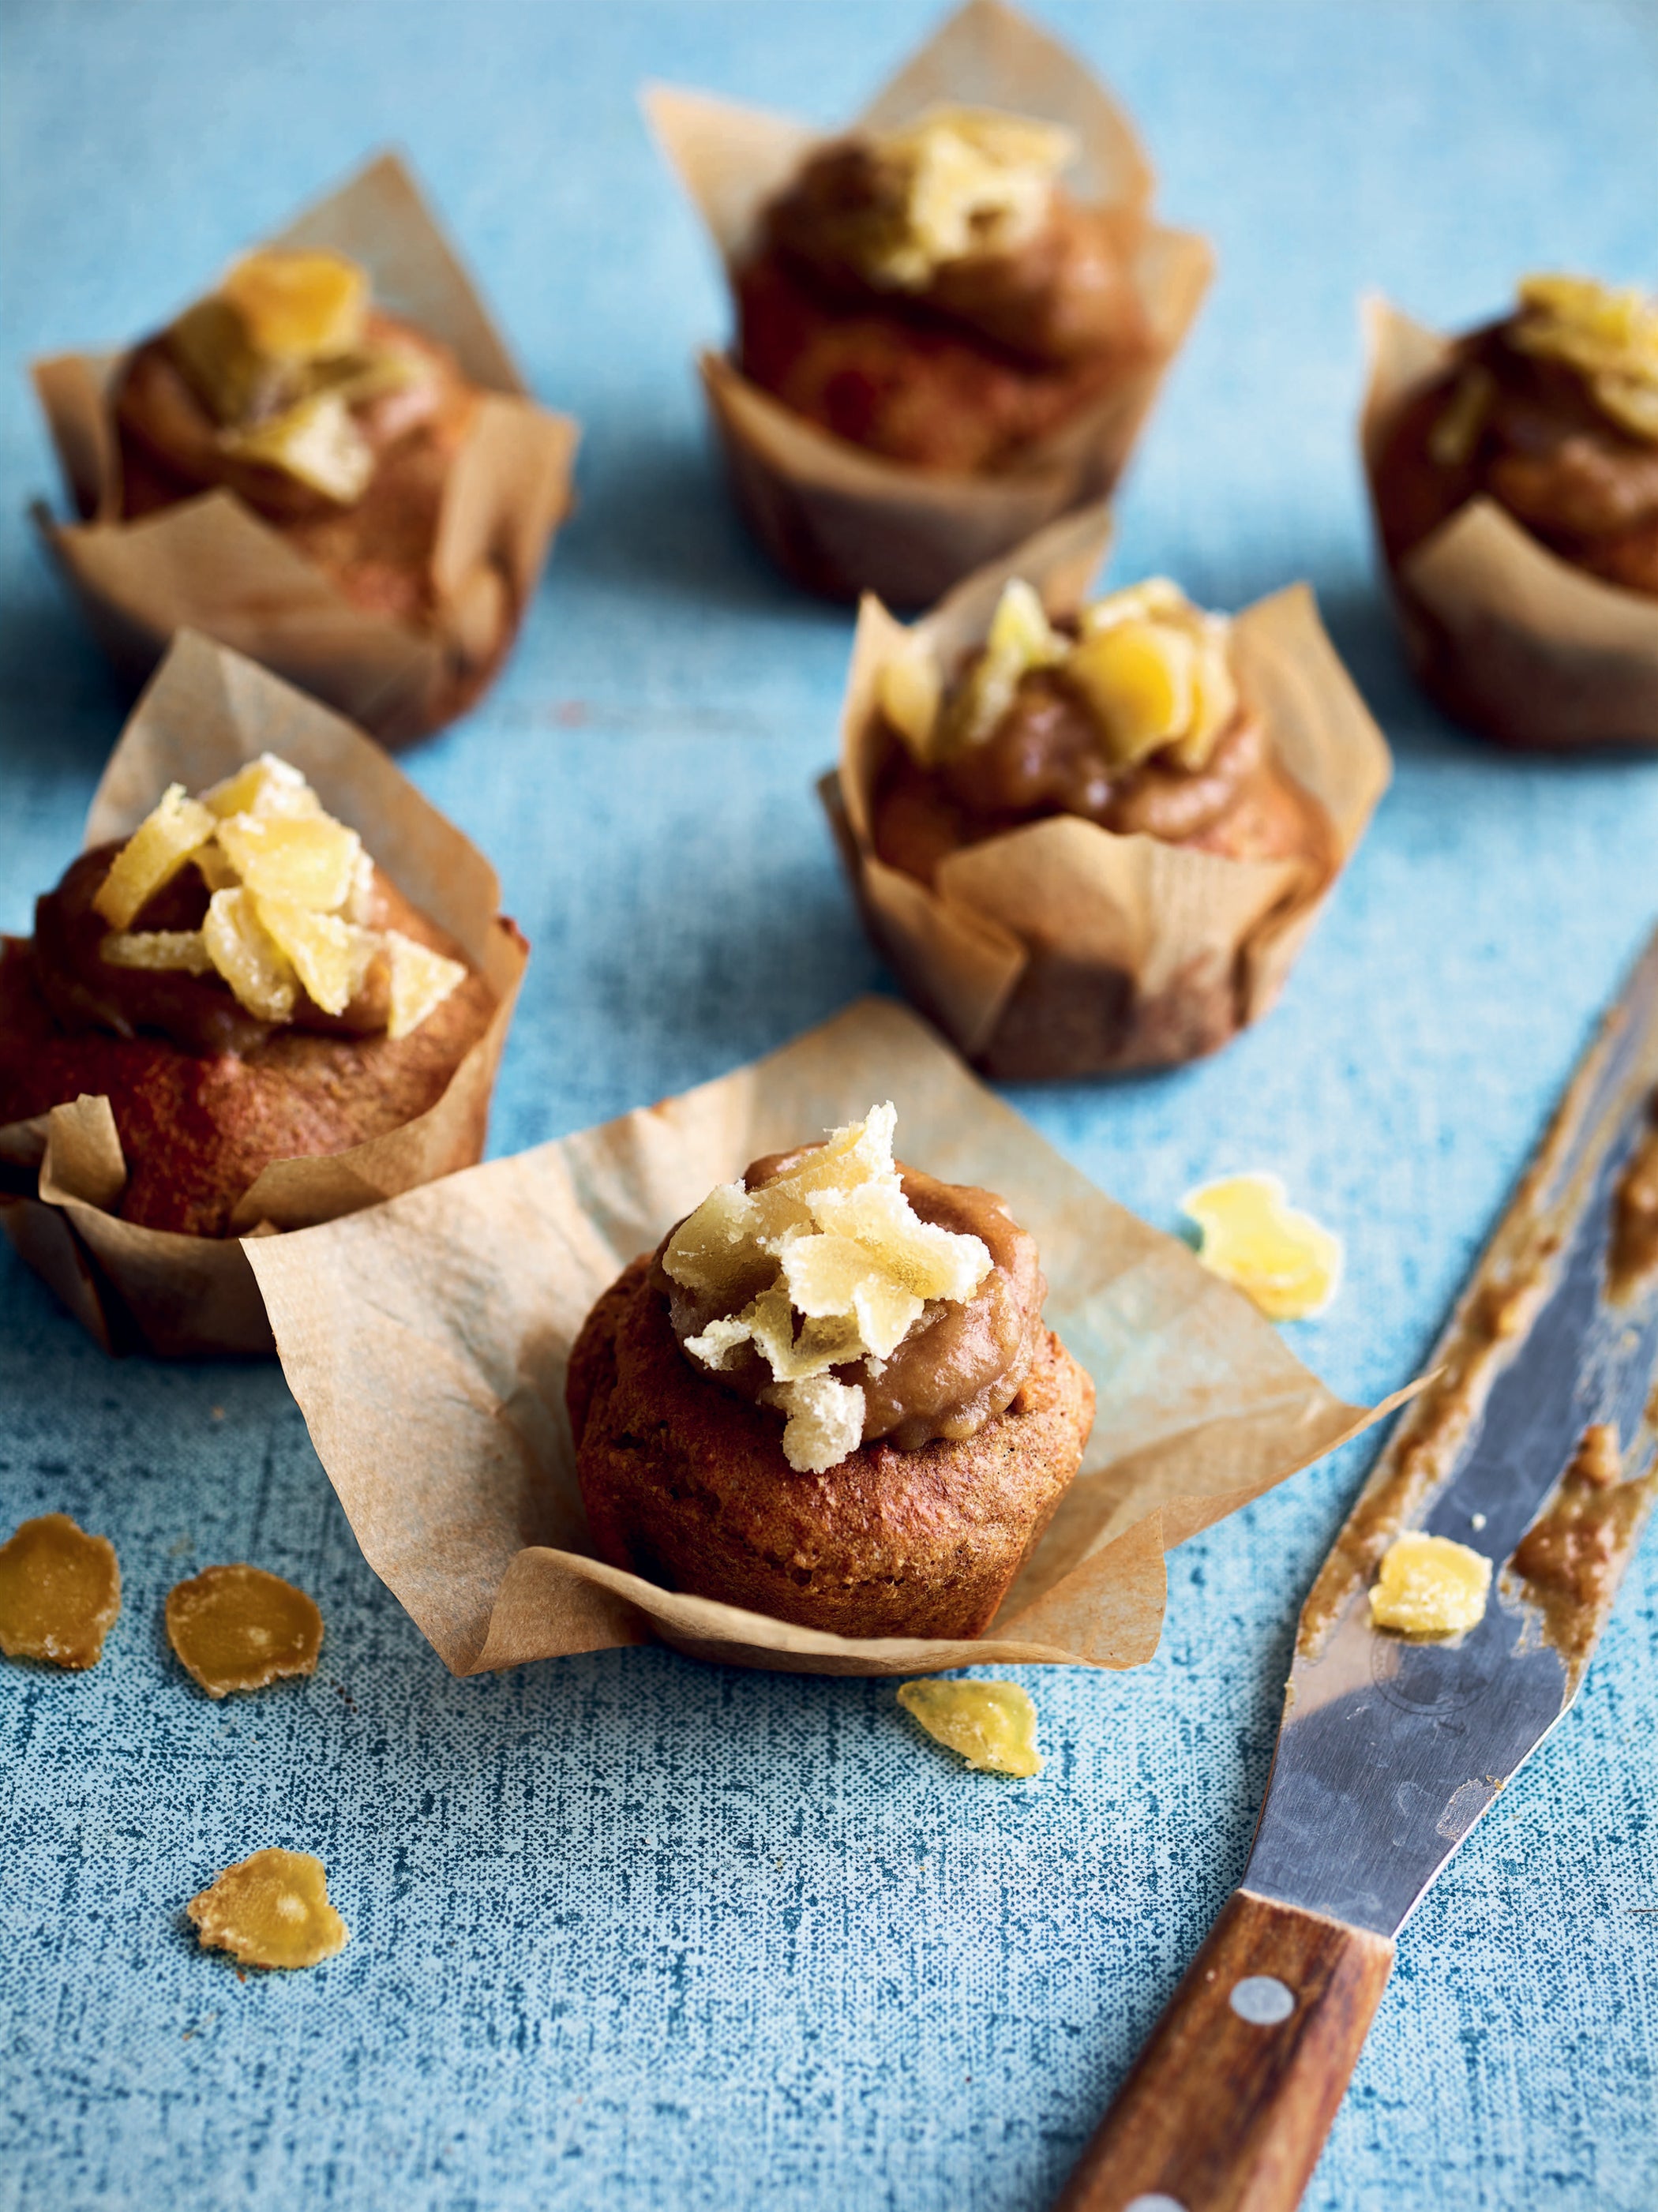 Soaked and blended into a puree, dates take on a smooth, sticky texture and caramel-like flavour